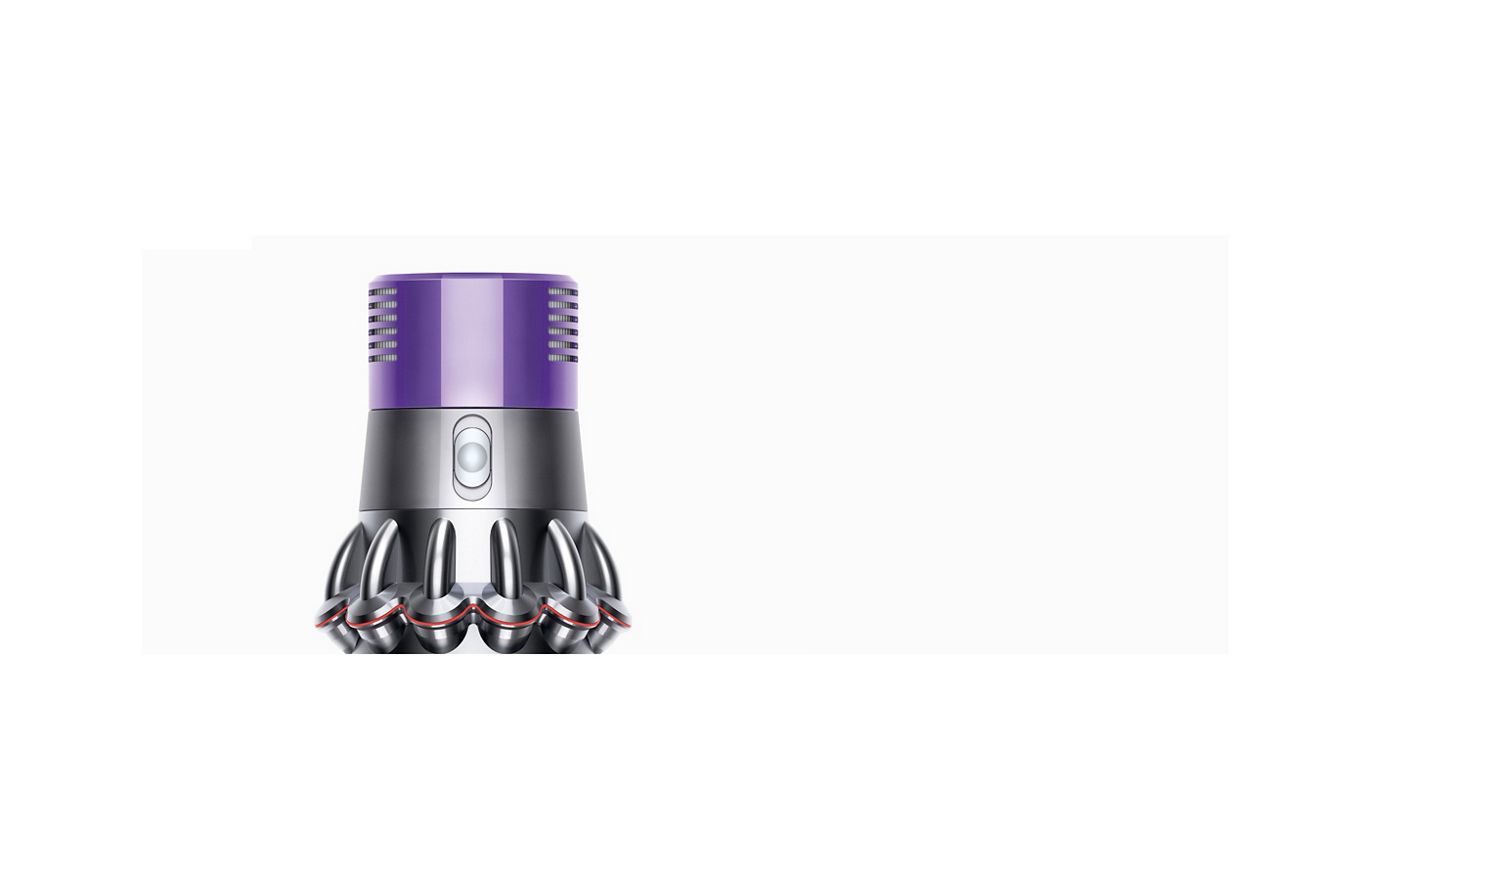 Dyson Cyclone V10™ Overview